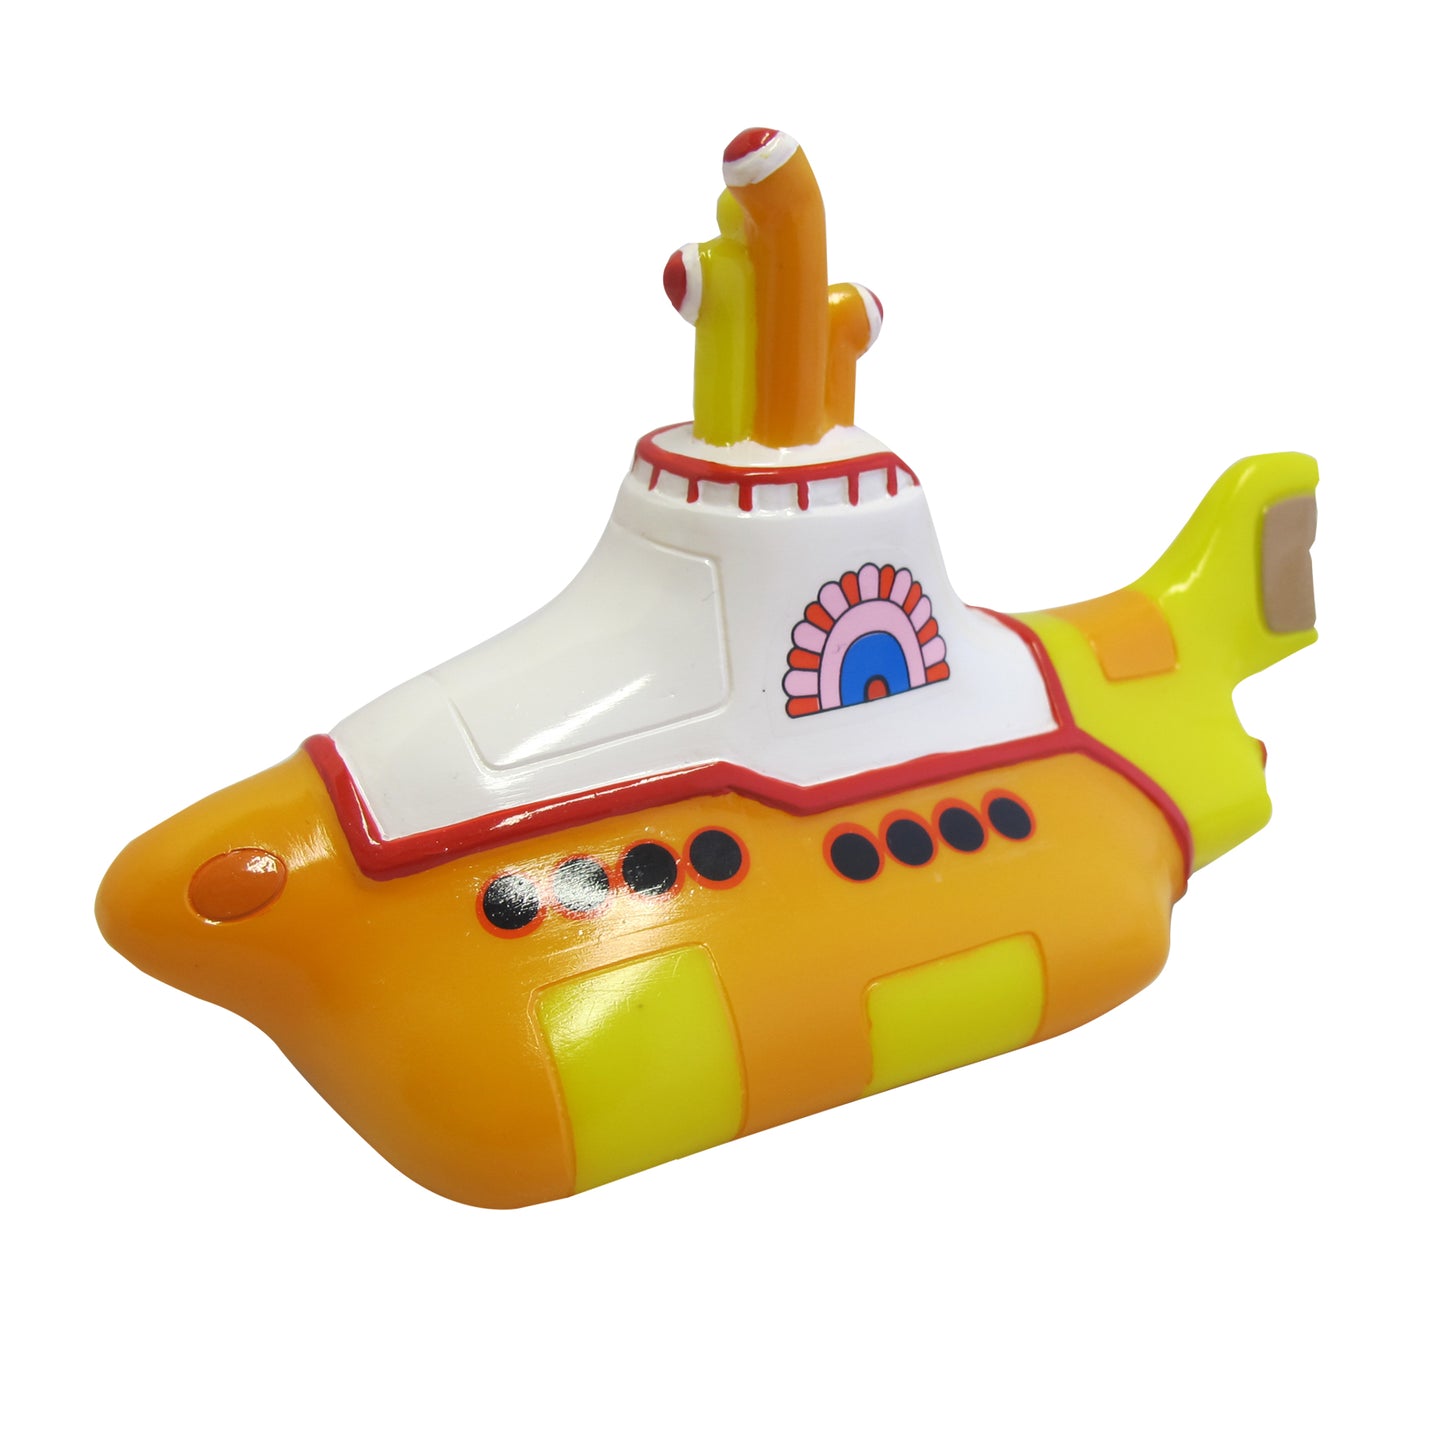 The Beatles Yellow Submarine lamp on a white background